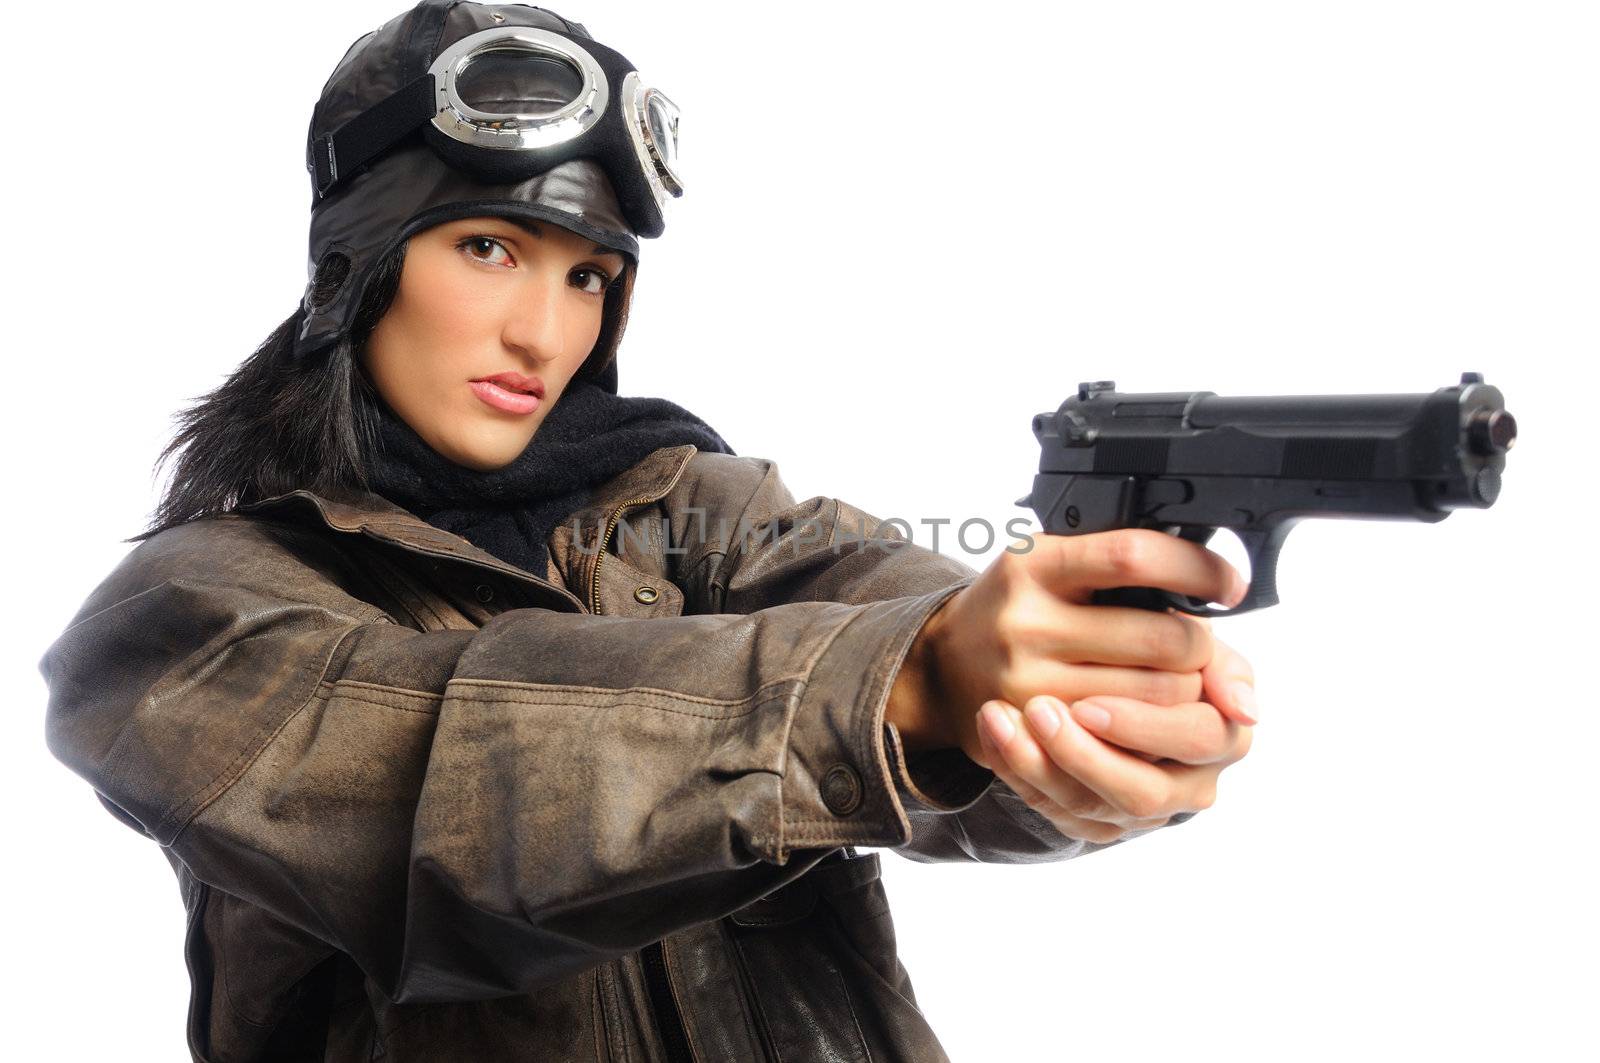 Hispanic woman in a vintage aviator costume holding a gun on a white background